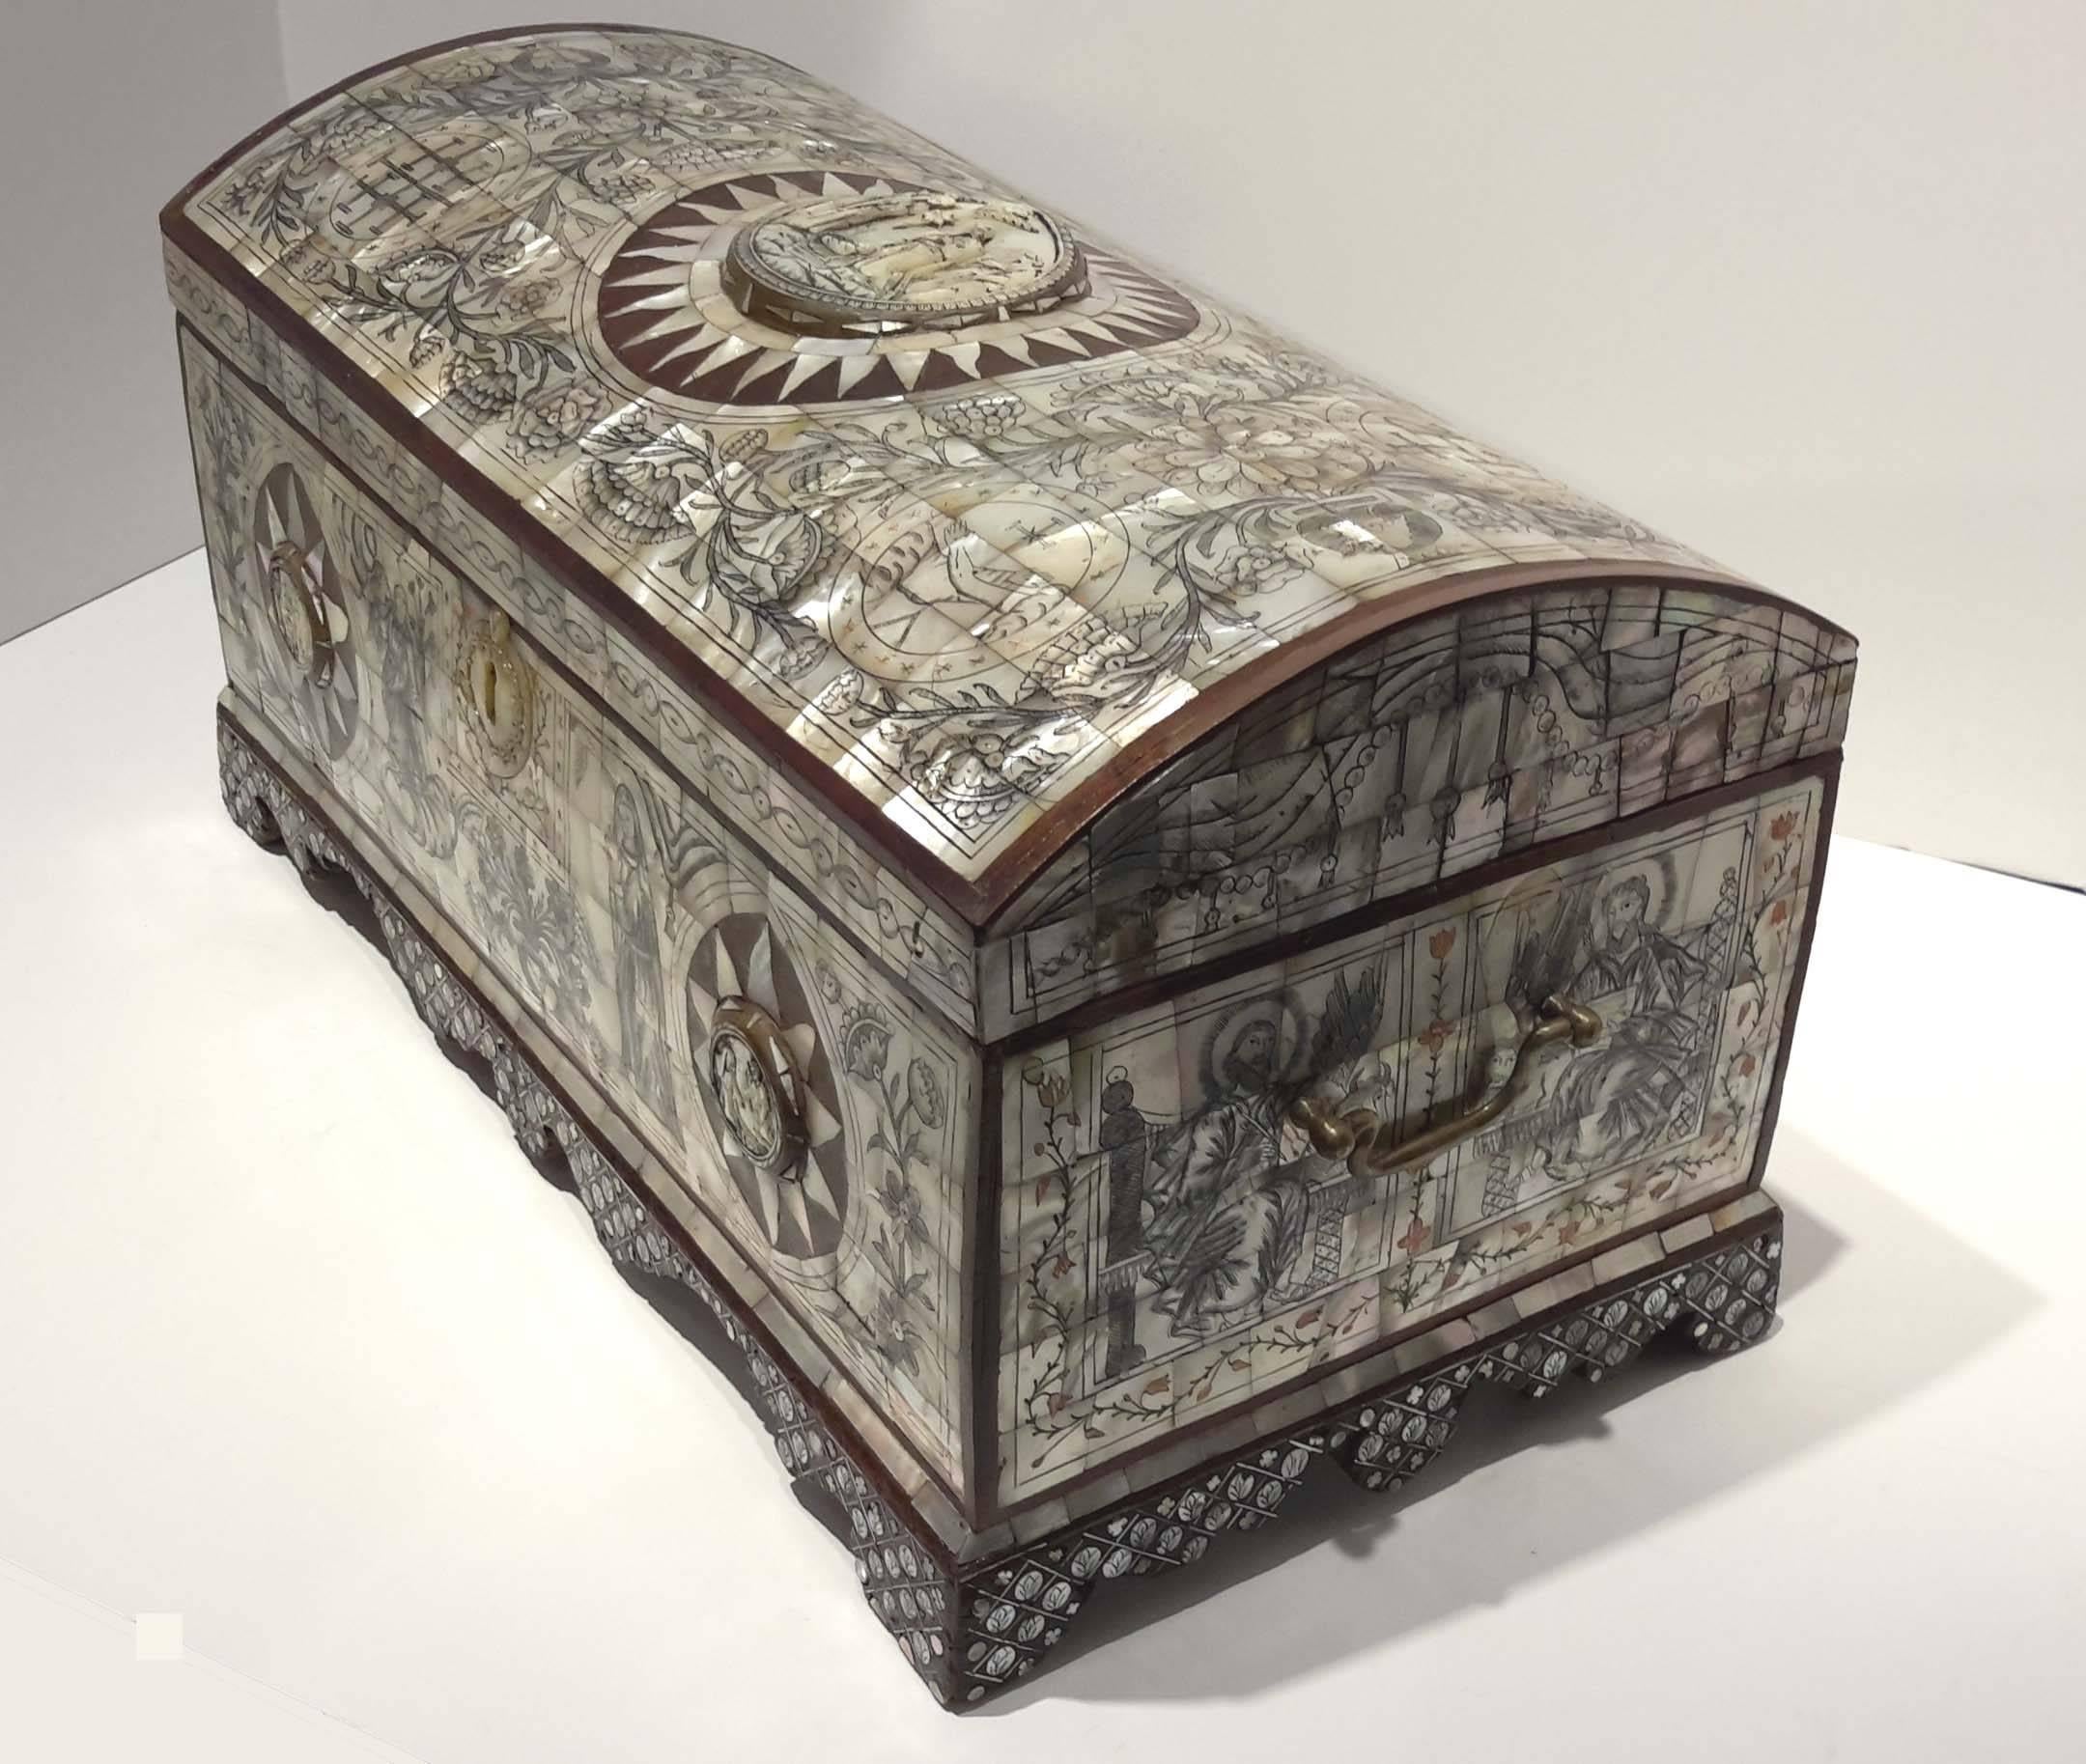 Gothic Revival Rare Mother-of-Pearl Decorated Reliquary Coffer, Jerusalem, 18th Century